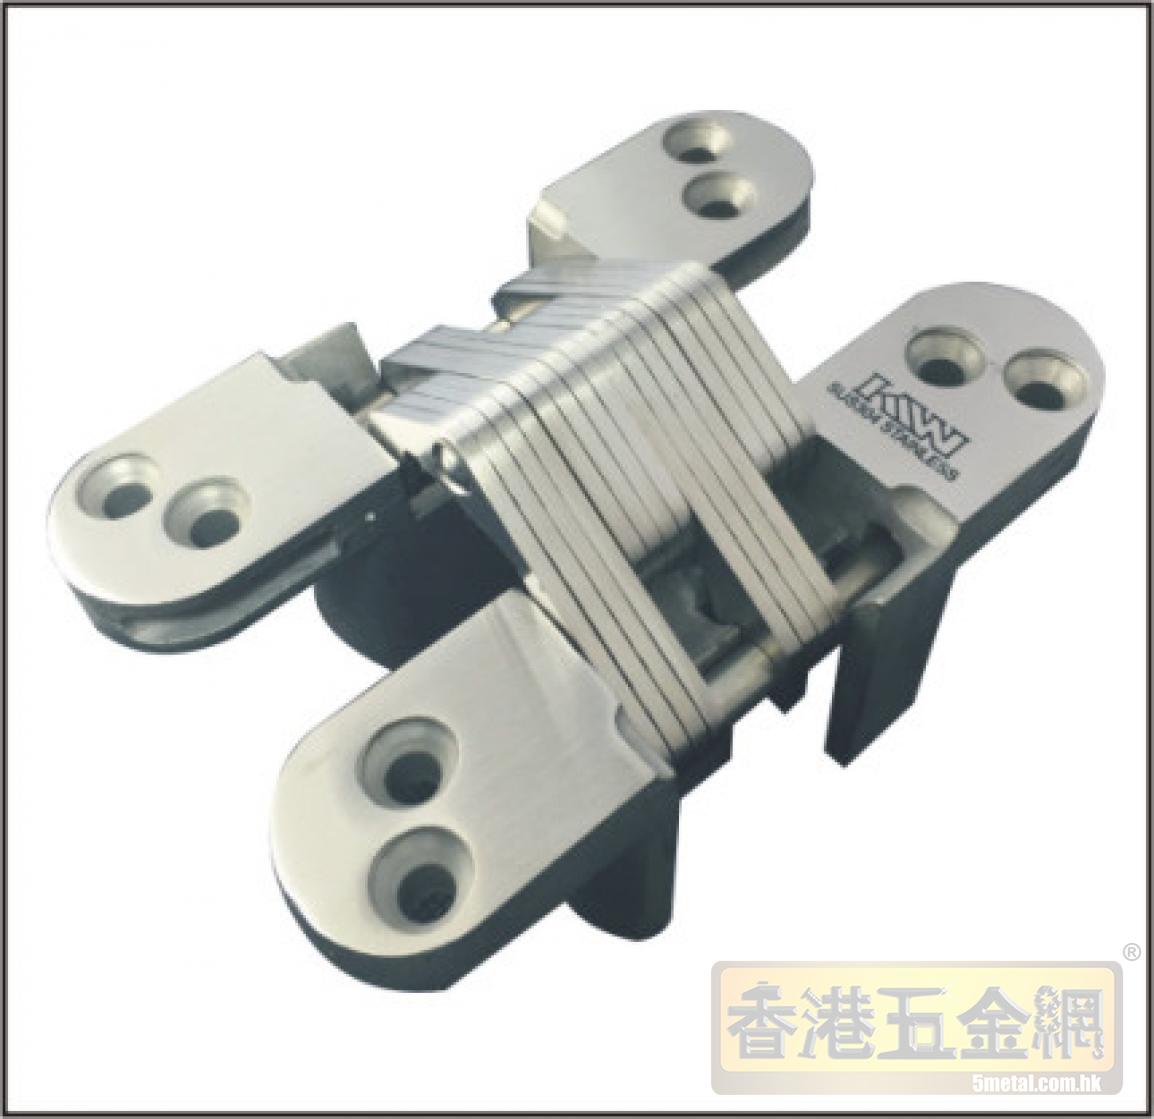 Hinge KW 848 不鏽鋼暗鉸鏈 不銹鋼暗鉸鏈 樞 合頁 鉸 304 或 316 | Stainless steel concealed ball bearing hinge 304 or 316